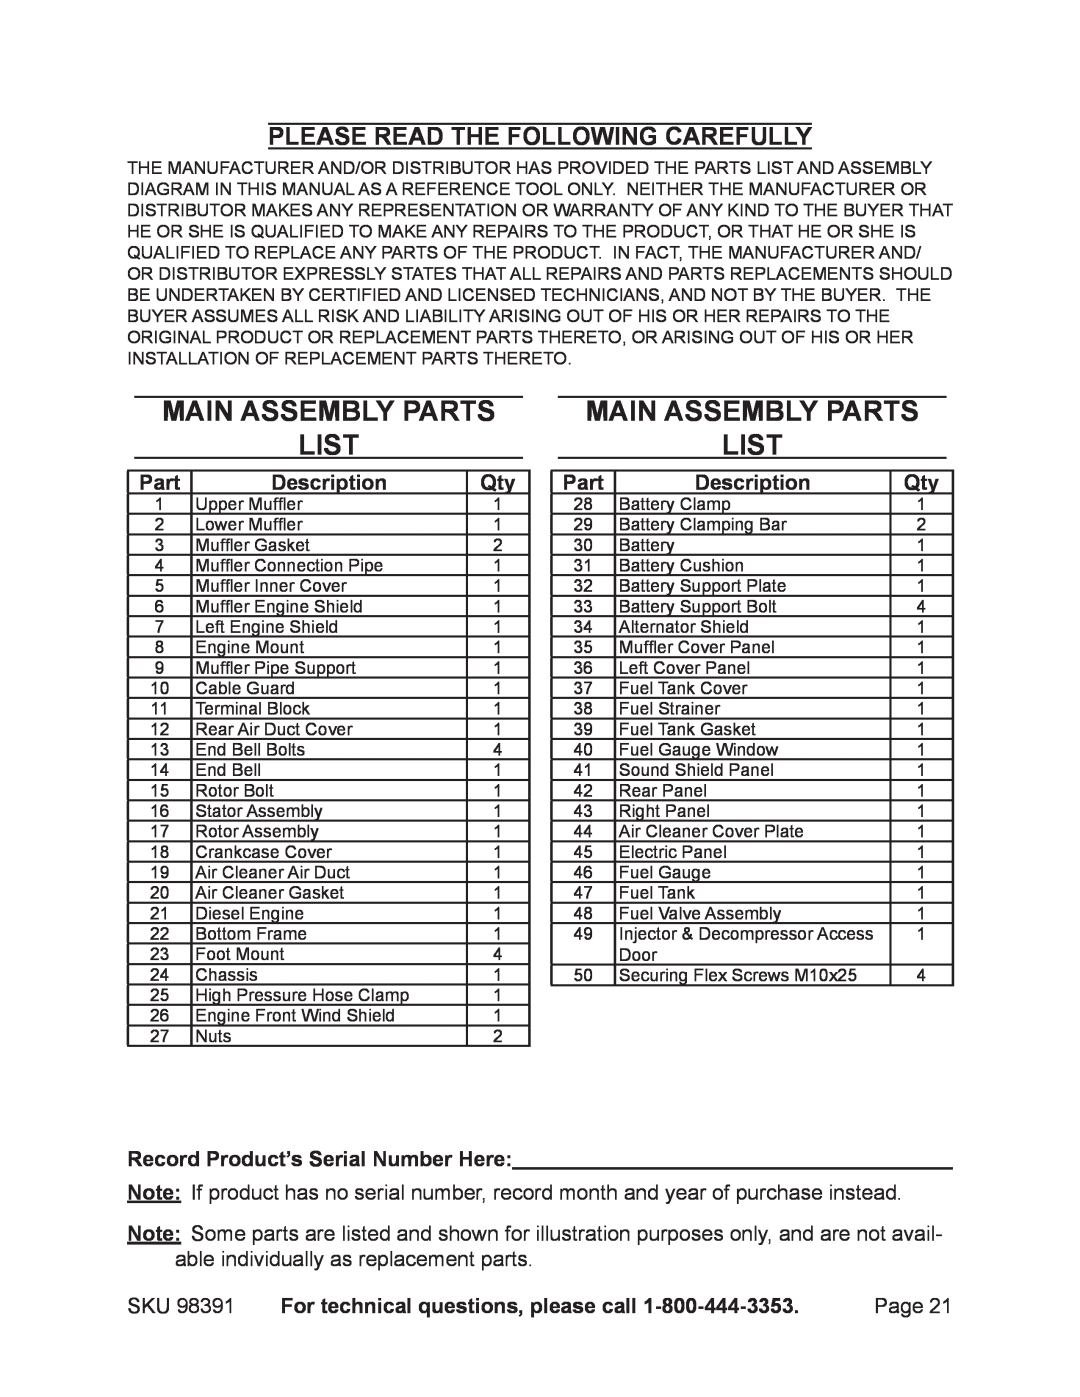 Chicago Electric 98391 manual Main assembly PARTS LIST, Part, Description, Record Product’s Serial Number Here 